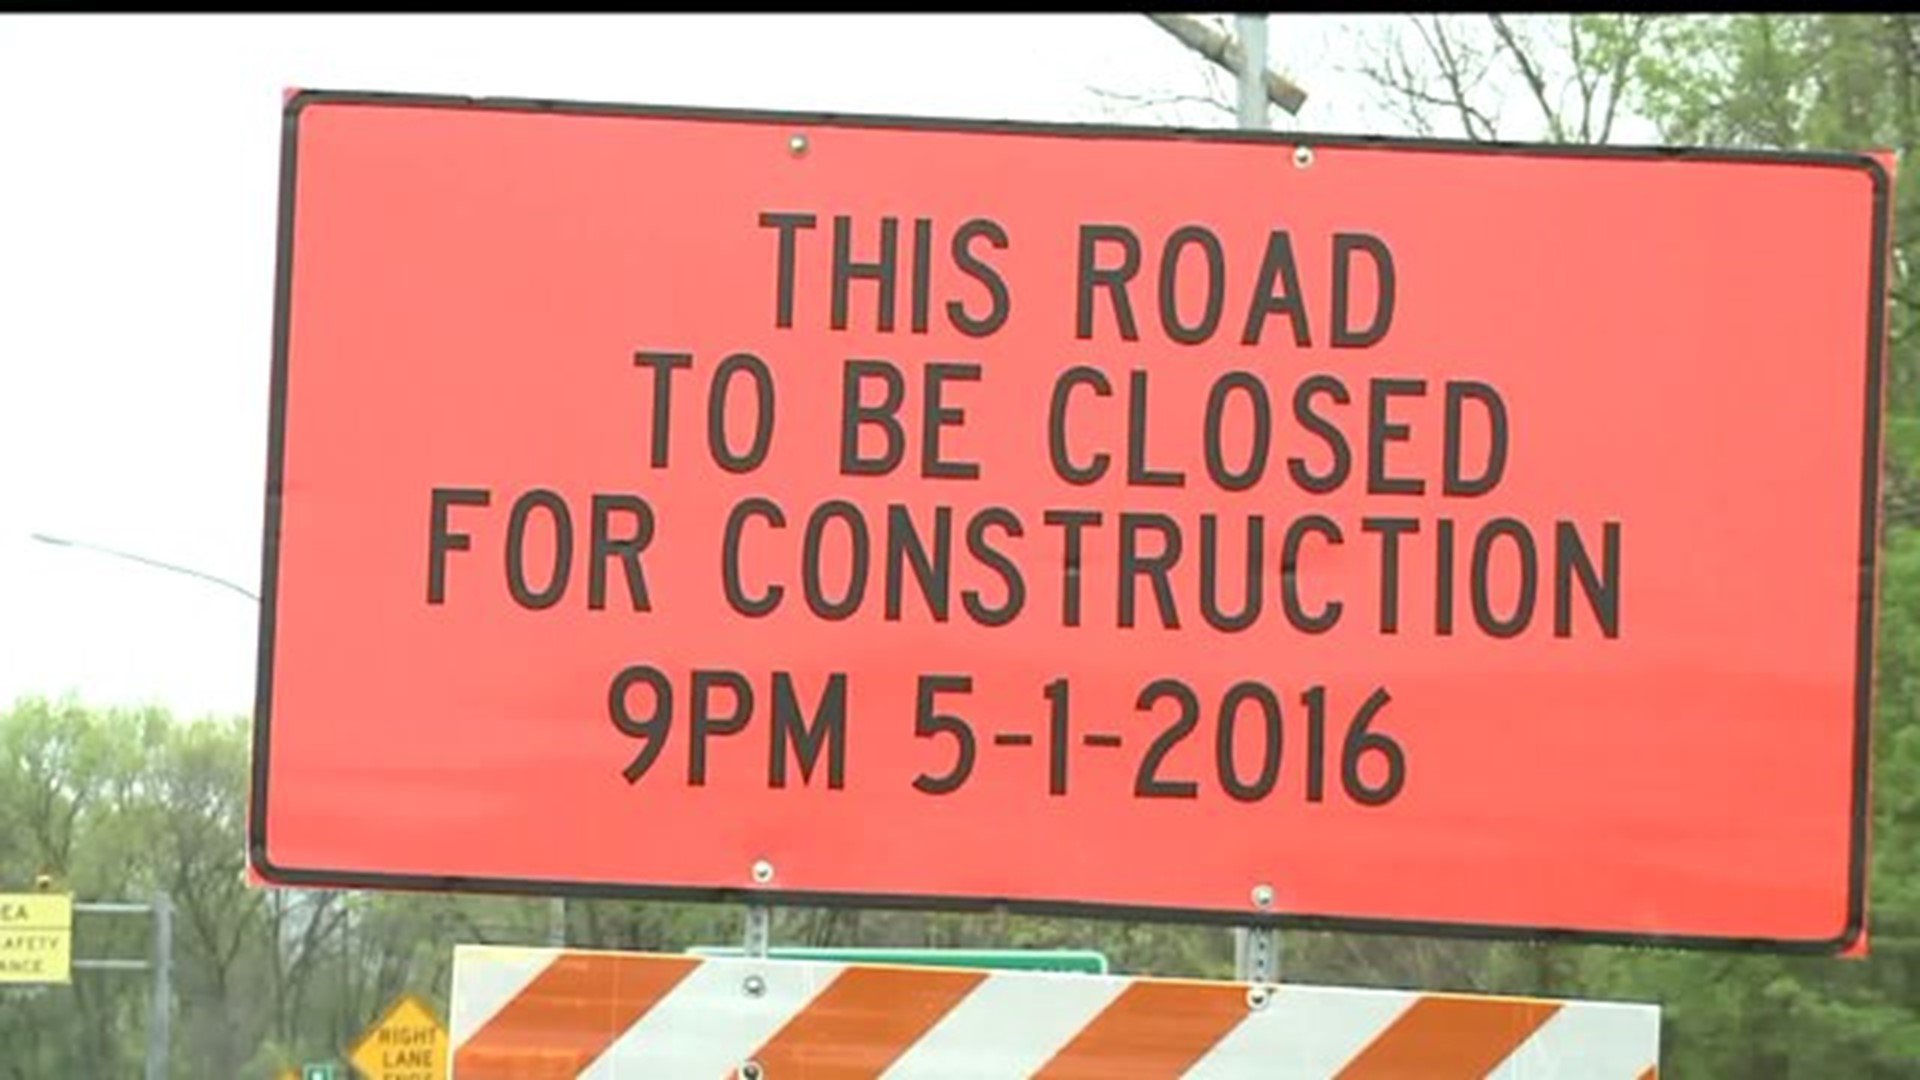 Route 11/15 now closed for three months between Marysville and I-81